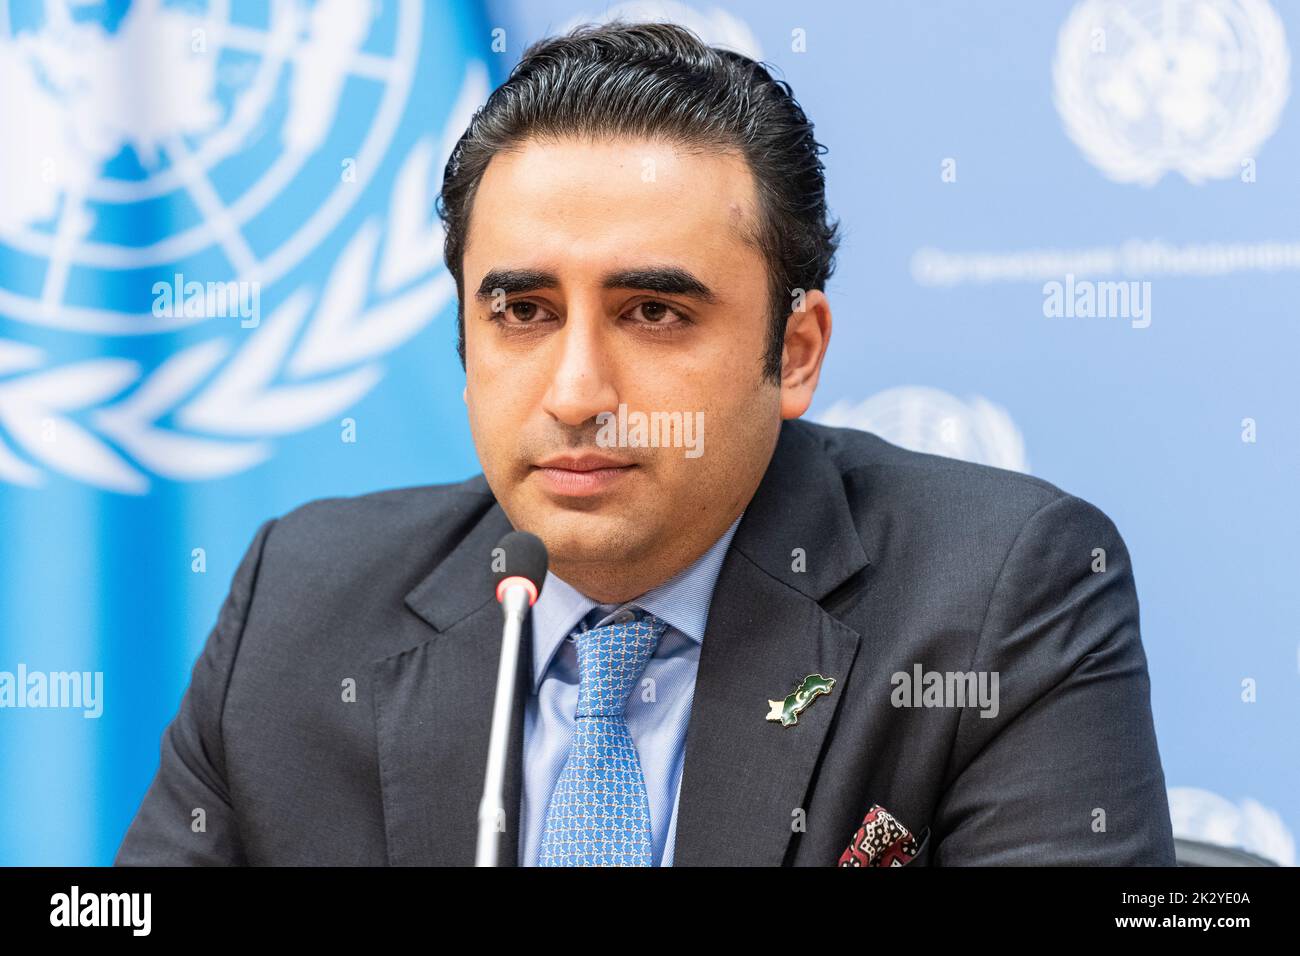 New York, NY - September 23, 2022: Press briefing by Bilawal Bhutto Zardari, Minister for Foreign Affairs of the Islamic Republic of Pakistan at UN Headquarters Stock Photo